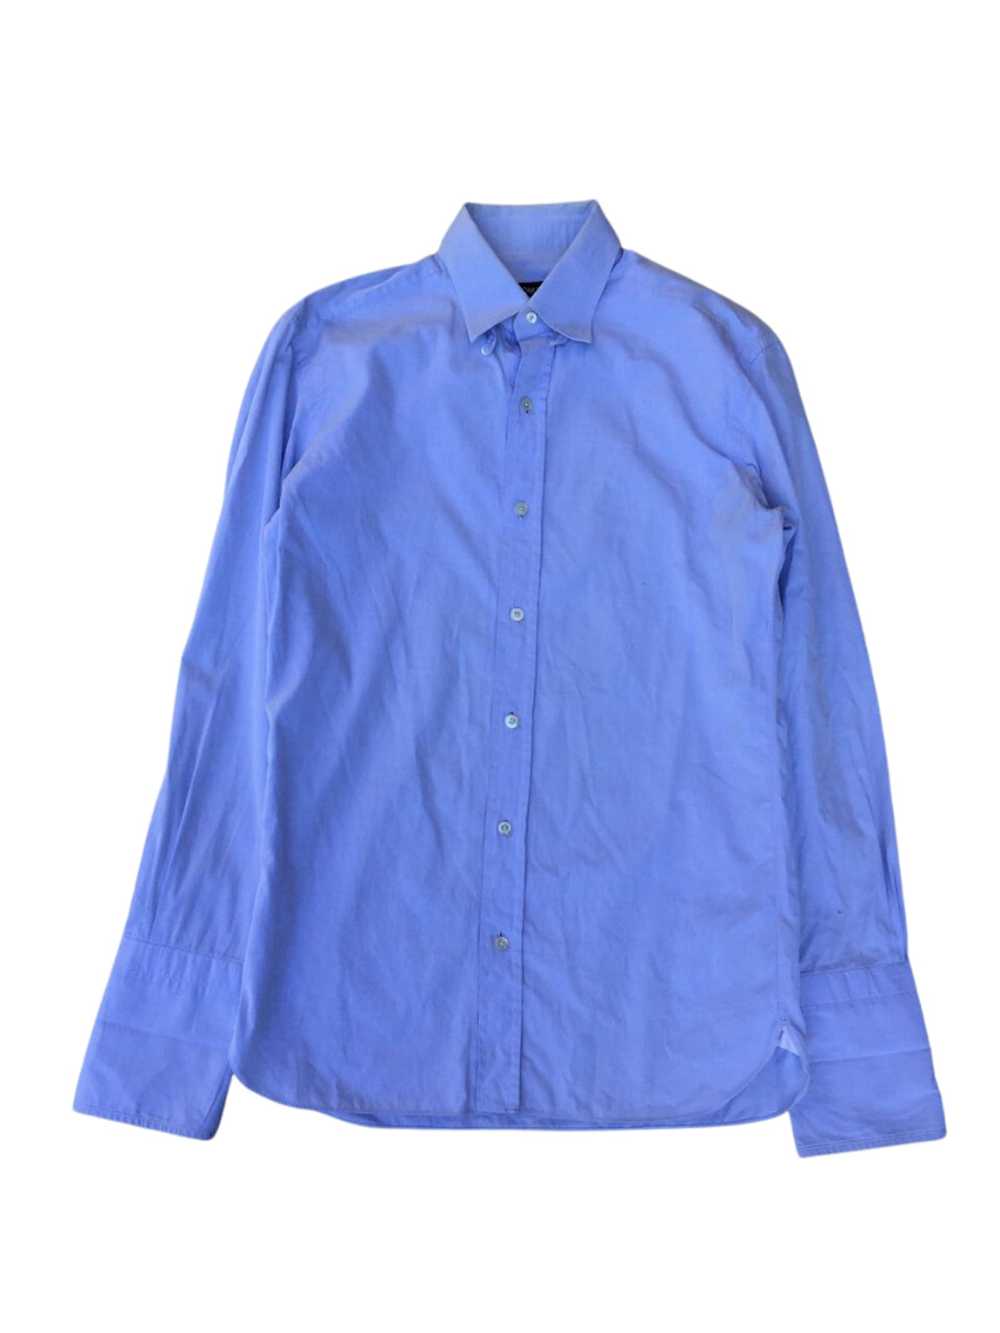 Tom Ford Tom Ford French Cuff button ups shirt - image 1